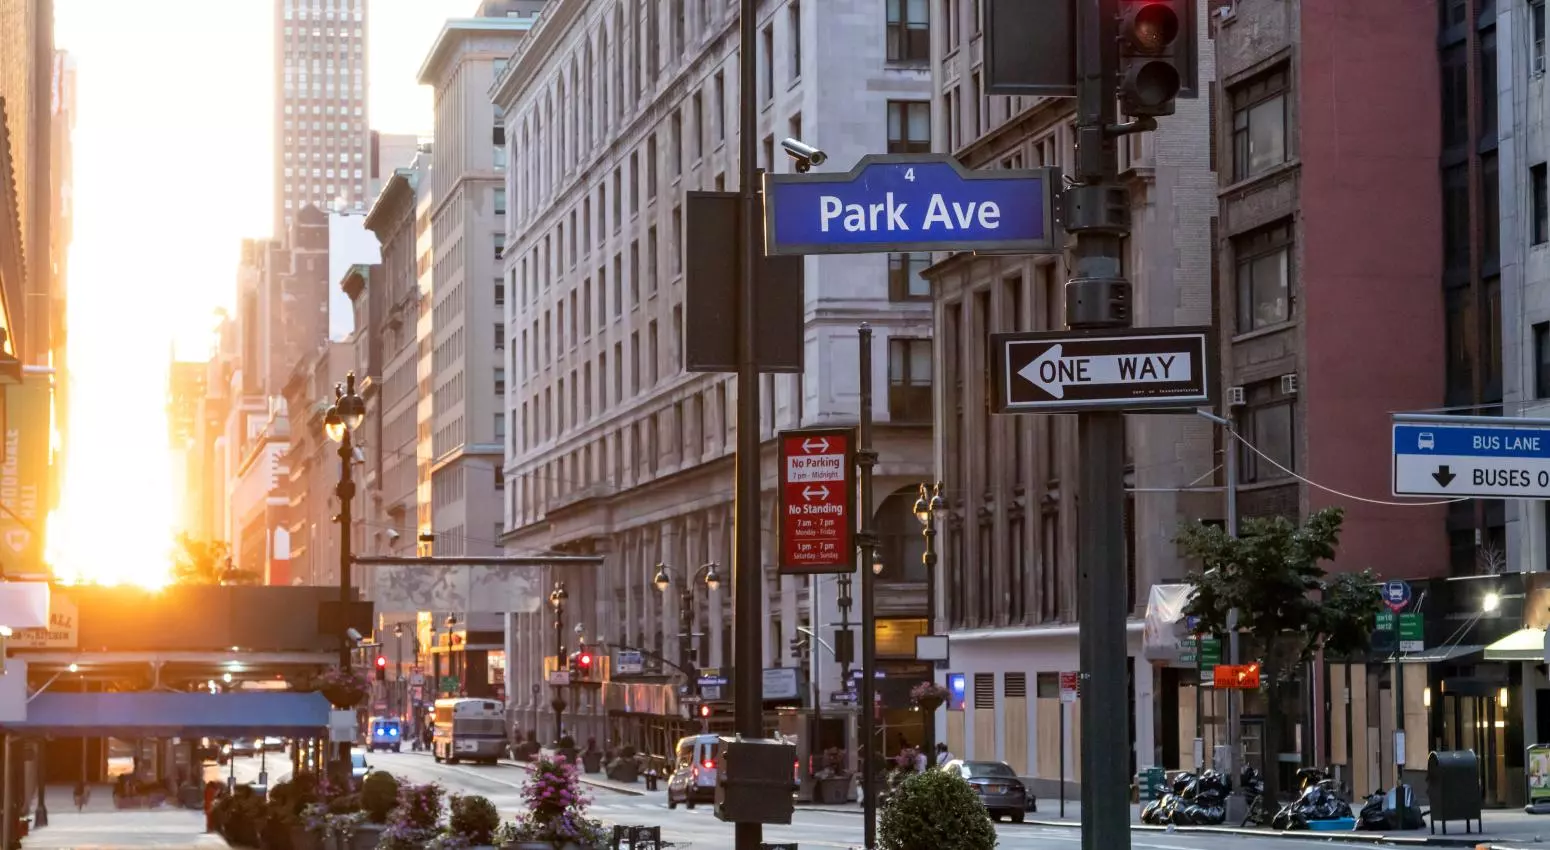 Get a virtual address in New York City without paying rent